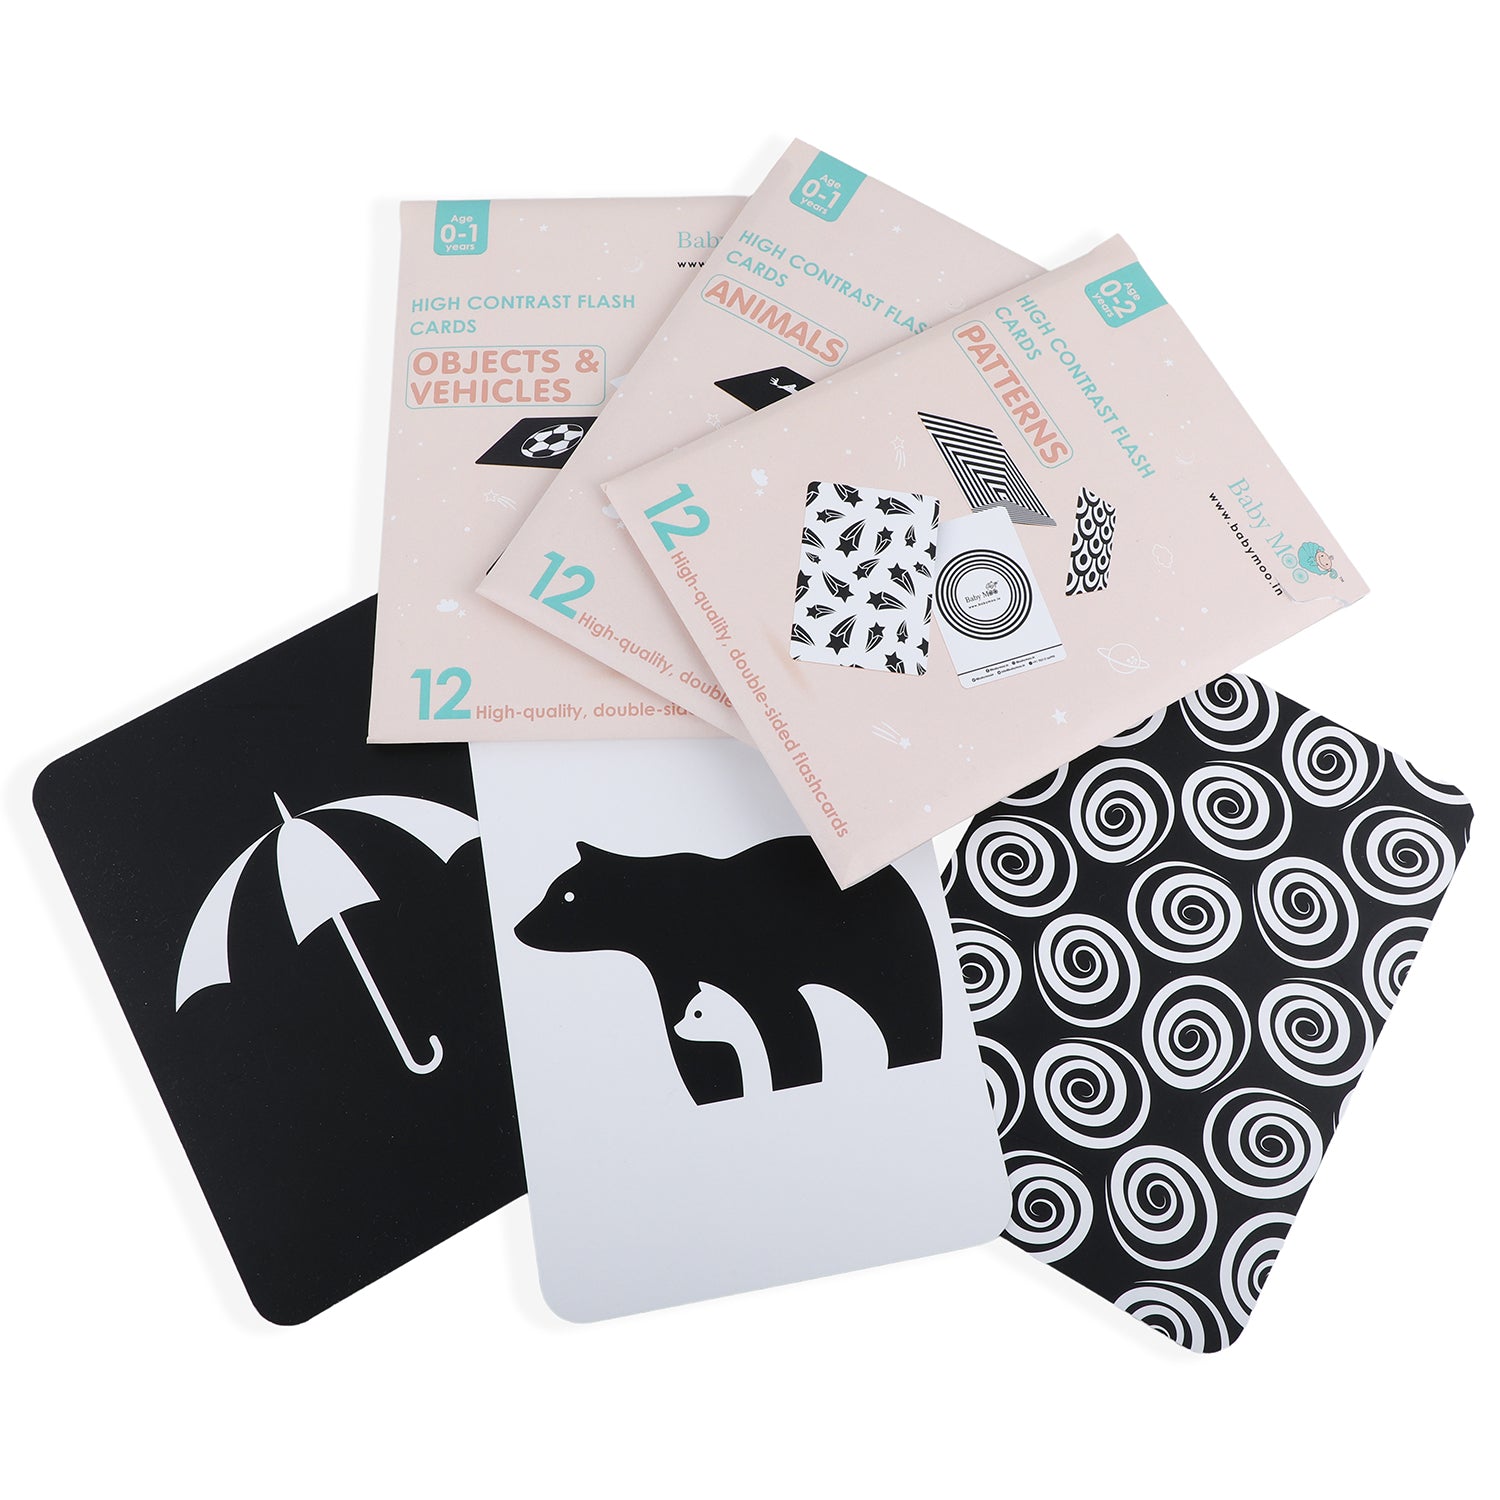 High Contrast Flash Cards 36 Cards - Bundle of Animals And Objects And Vehicles And Patterns